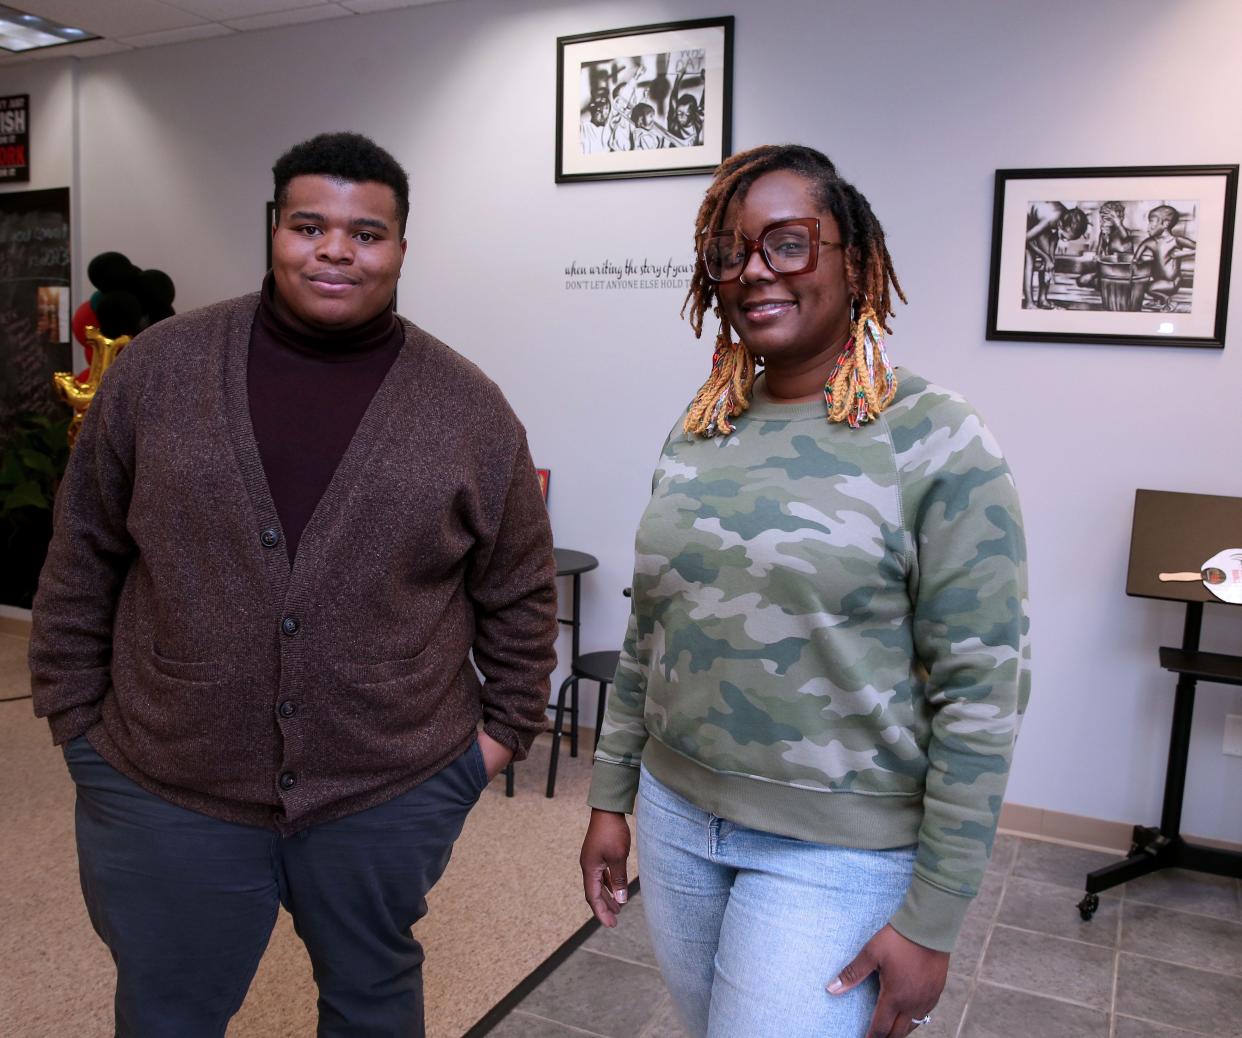 Devin Anderson, membership and coalition manager, left and Markasa Tucker-Harris, executive director, right, both from the African American Roundtable in Brown Deer on Monday, March 6, 2023.